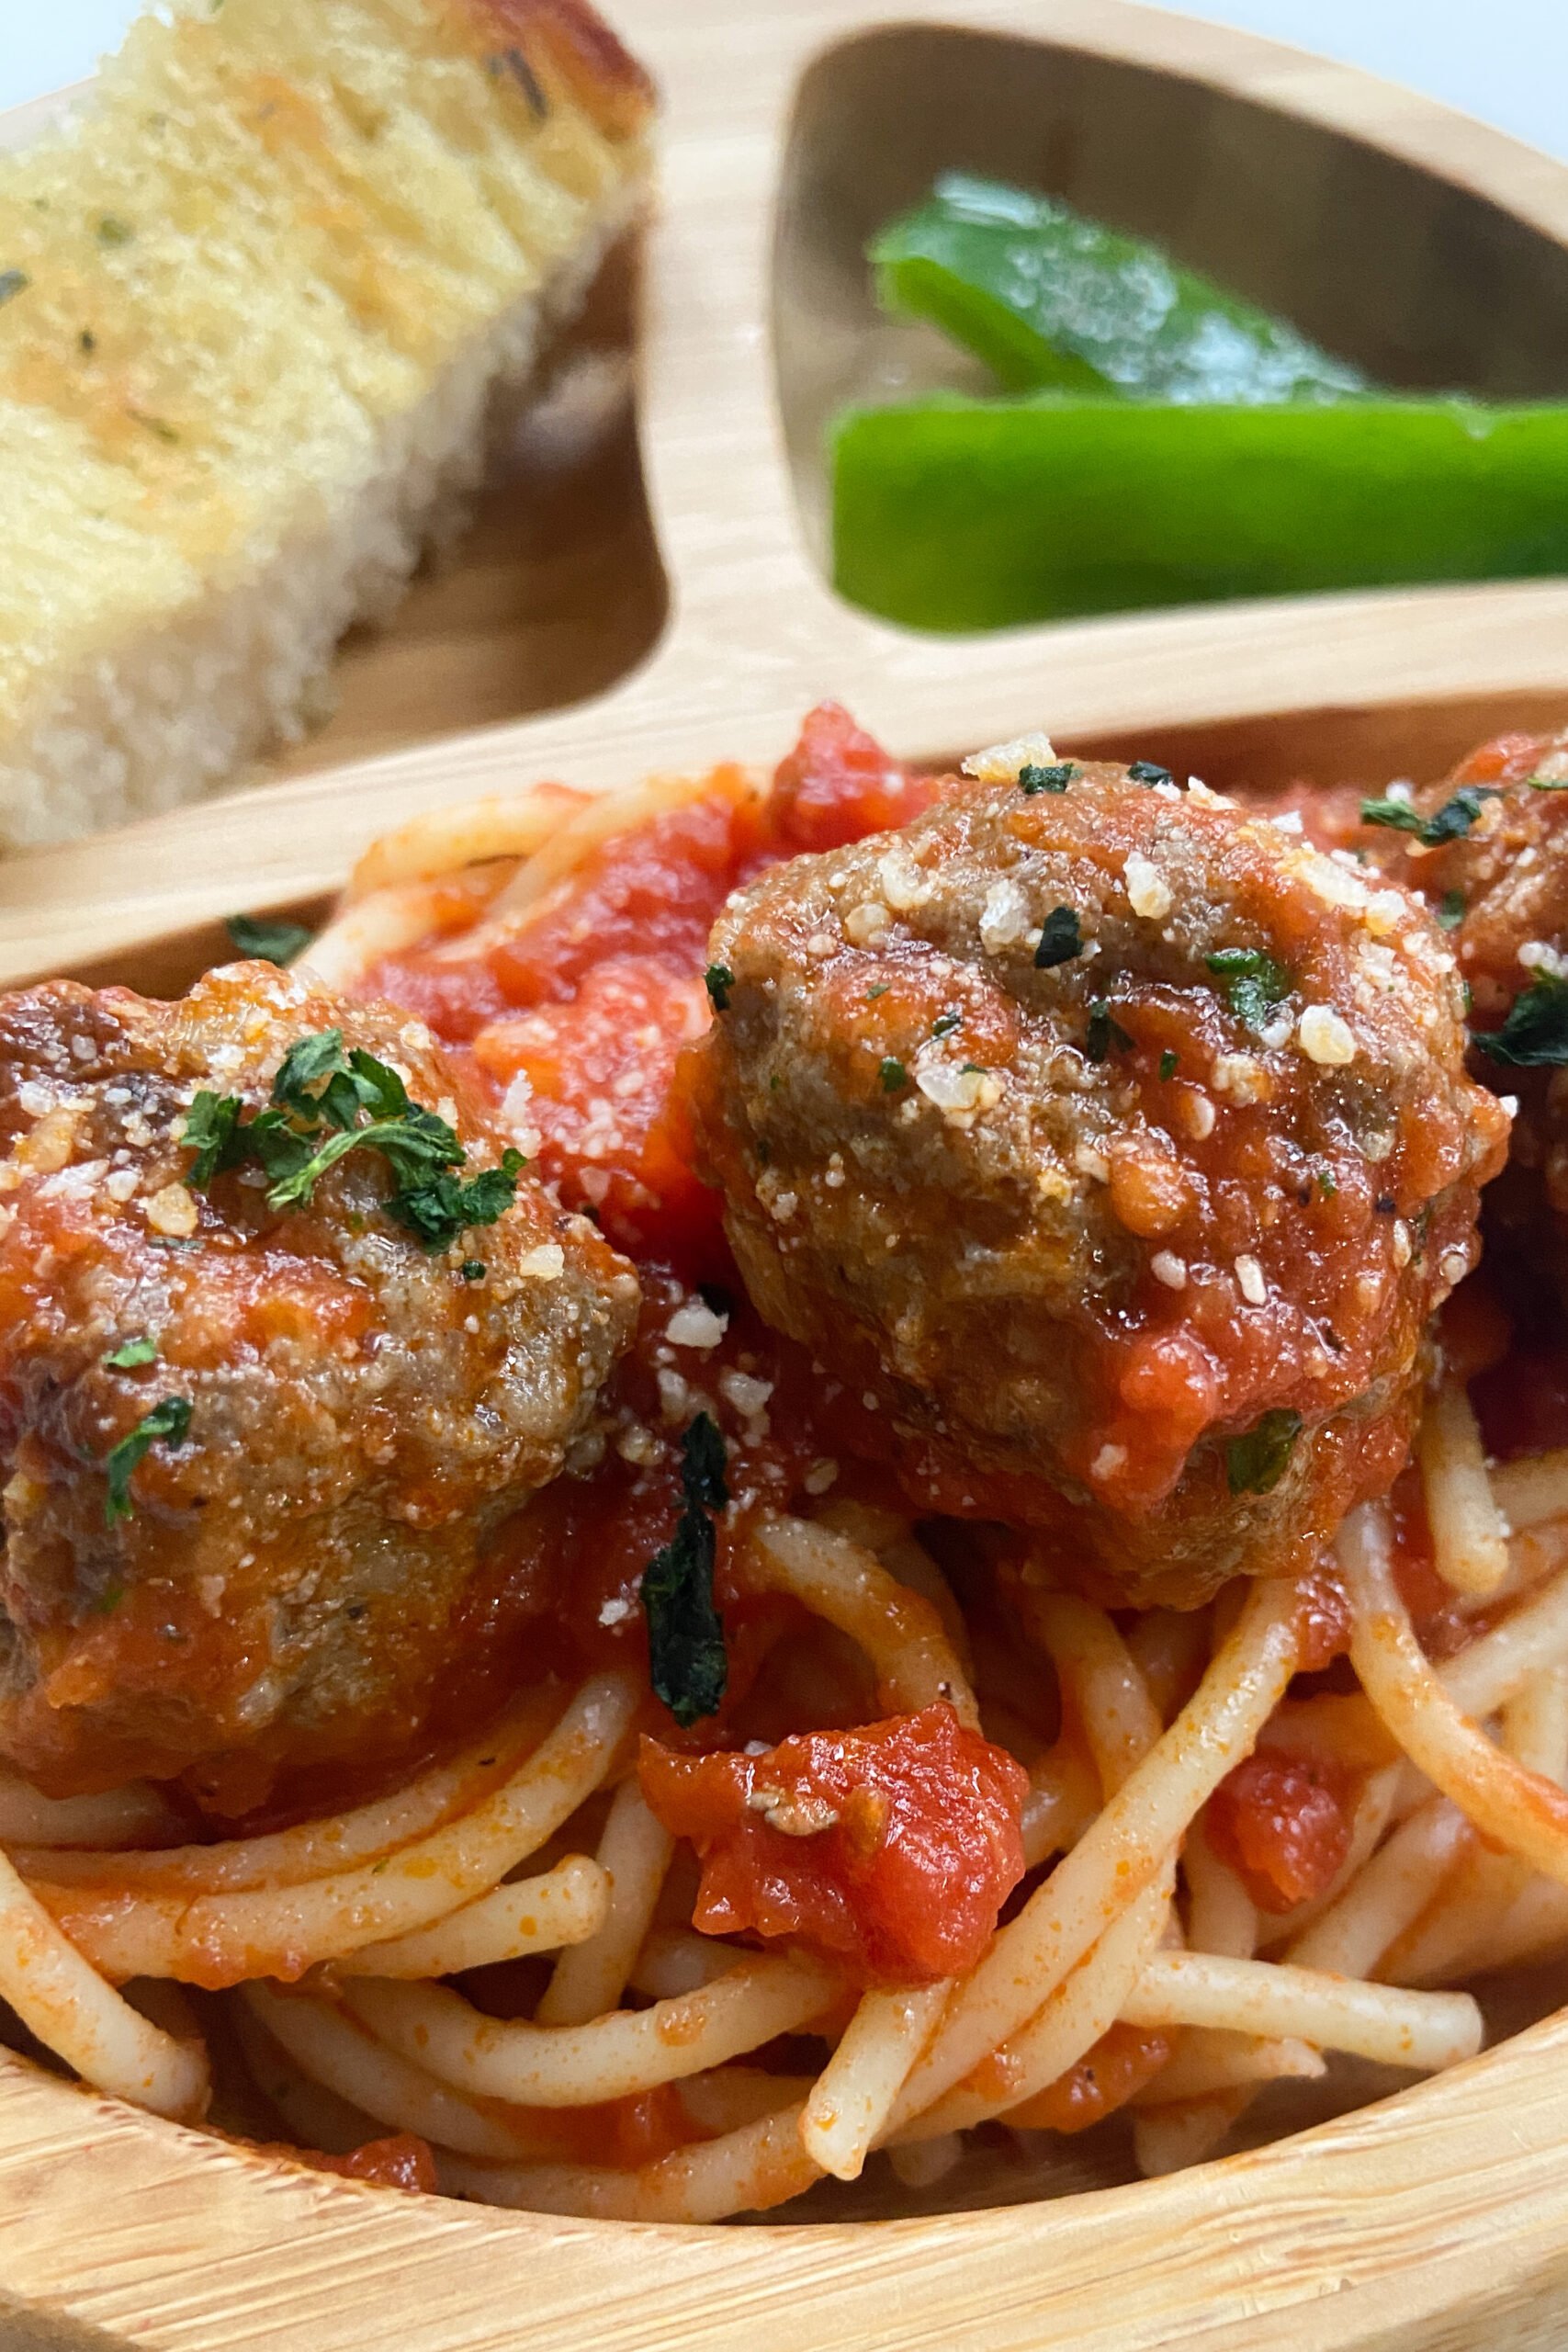 Meatballs served with spaghetti, garlic bread, and bell peppers.